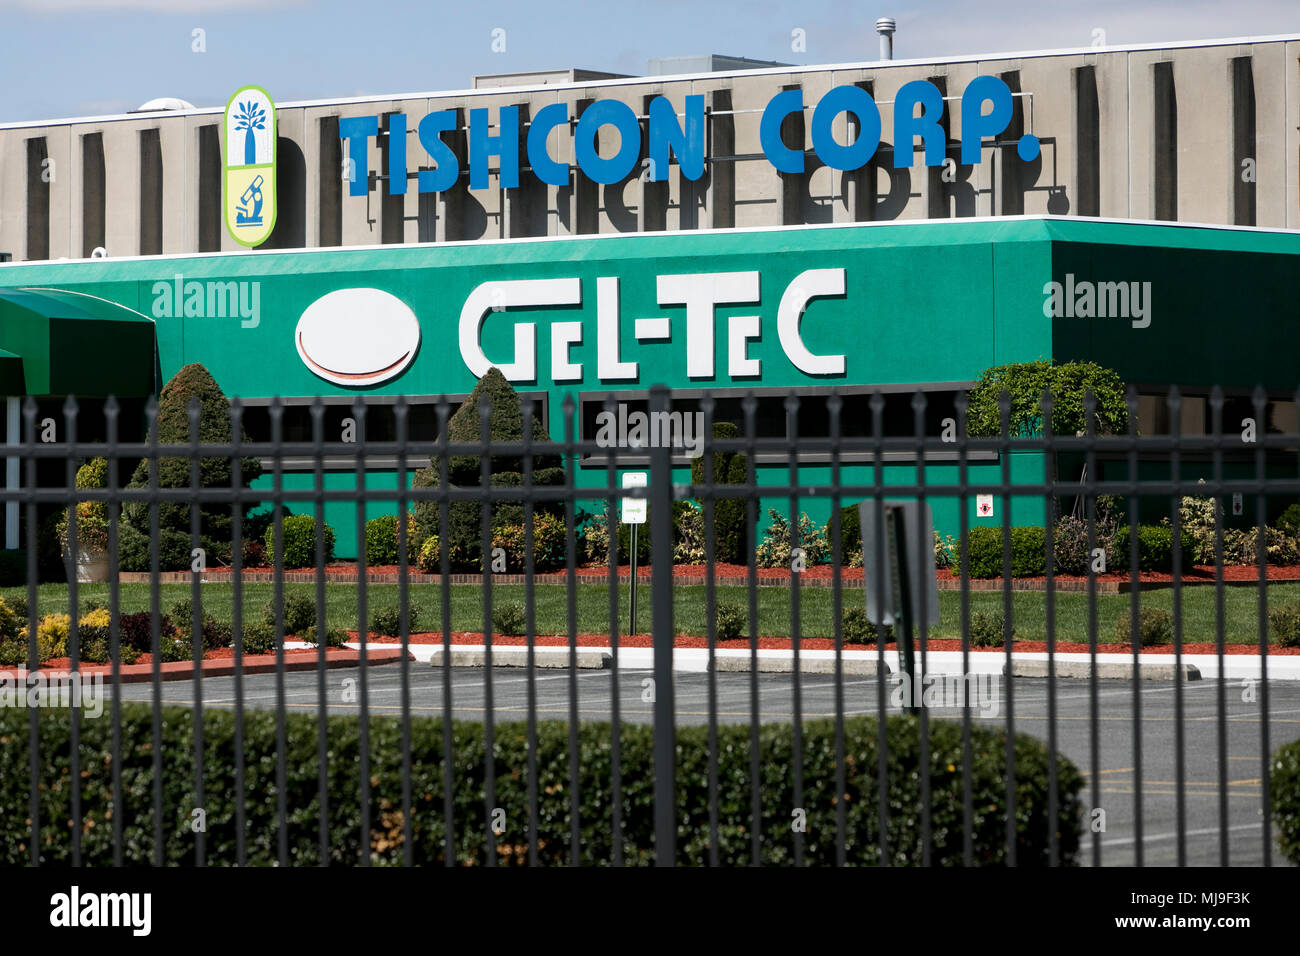 A logo sign outside of a facility occupied by Tishcon Corp., in Salisbury, Maryland, on April 29, 2018. Stock Photo